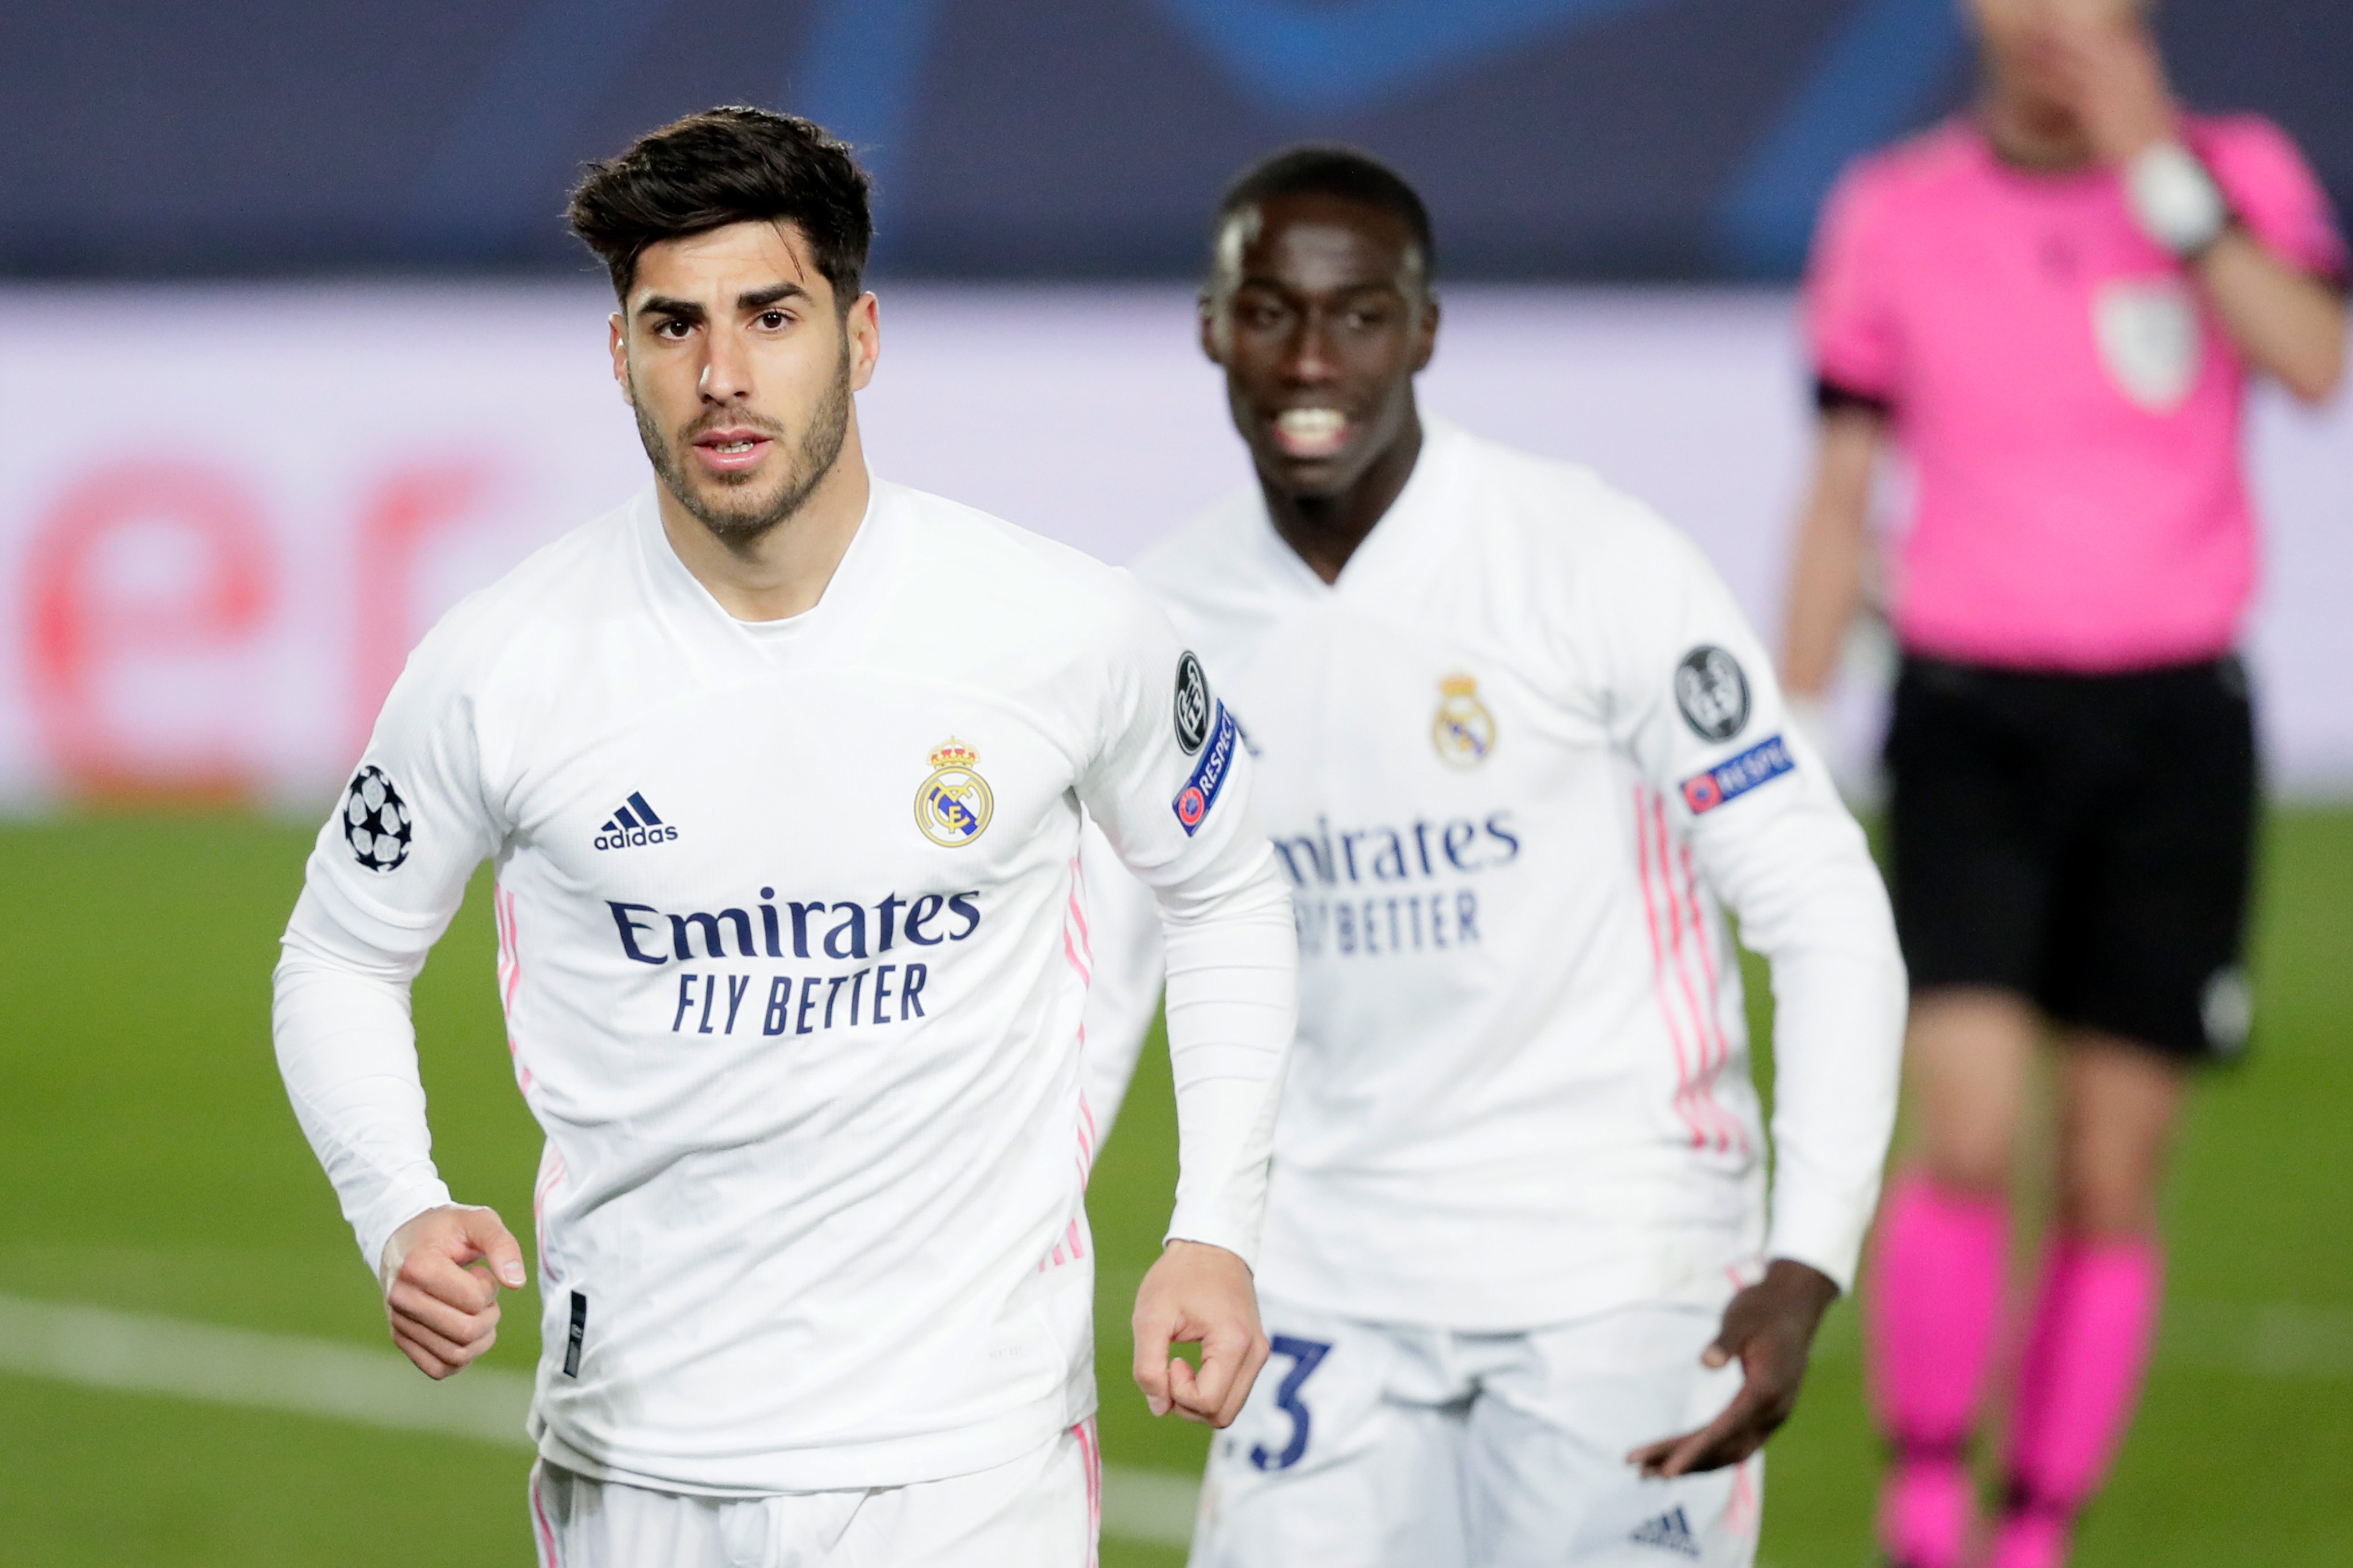 Soccer : UEFA Champions League 2018/19 - Round of 16 1st Leg : AJAX 1-2  Real Madrid on February 13, 2019 at the Amsterdam Arena in Amsterdam,  Holland. Marco Asensio scores for